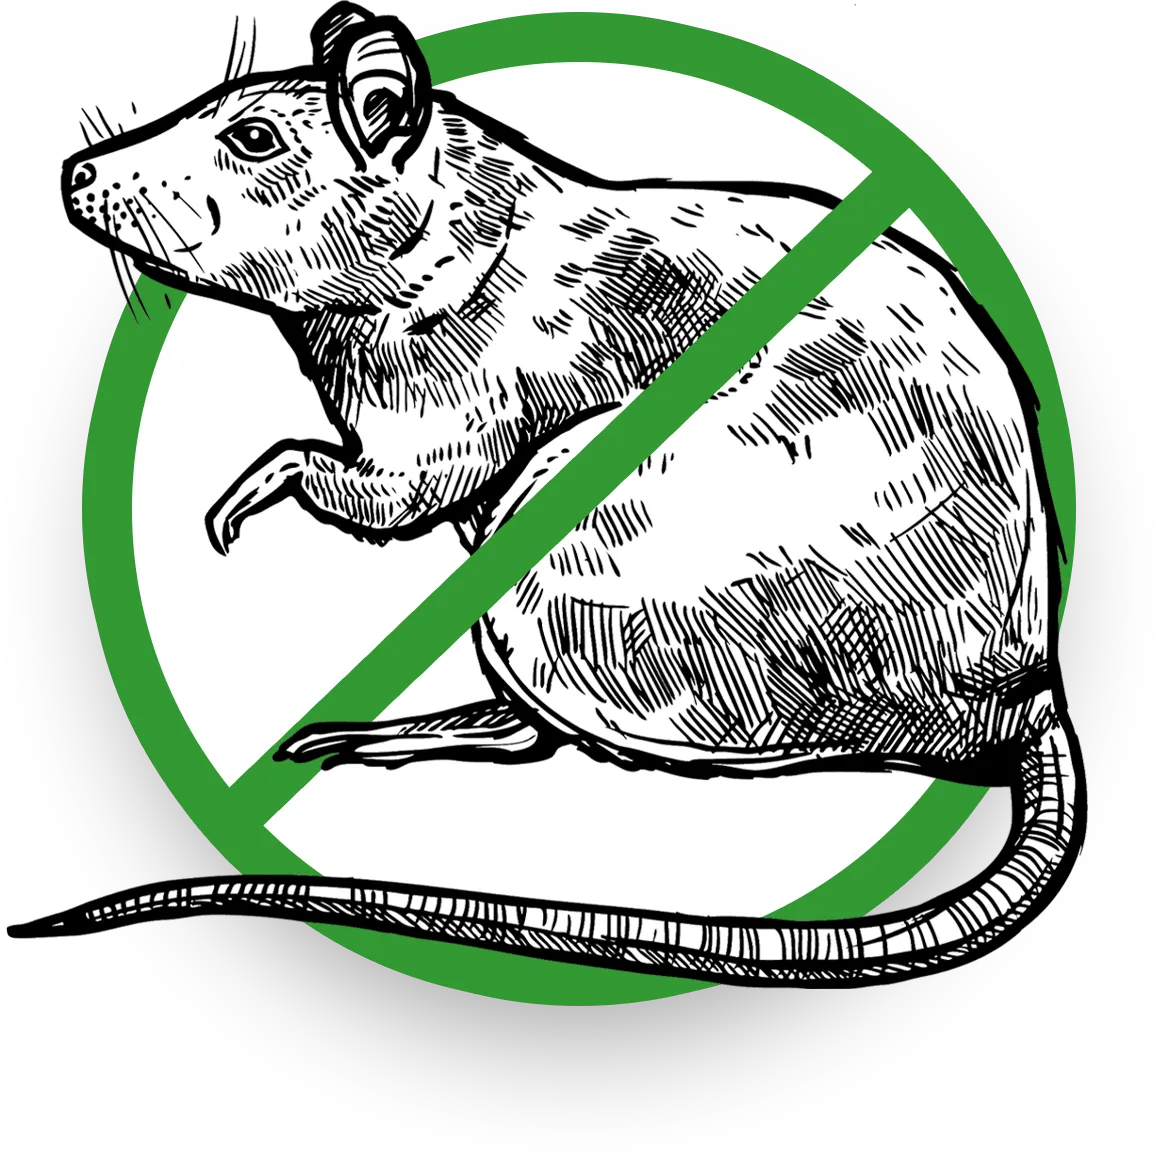 Illustration of a Rodent